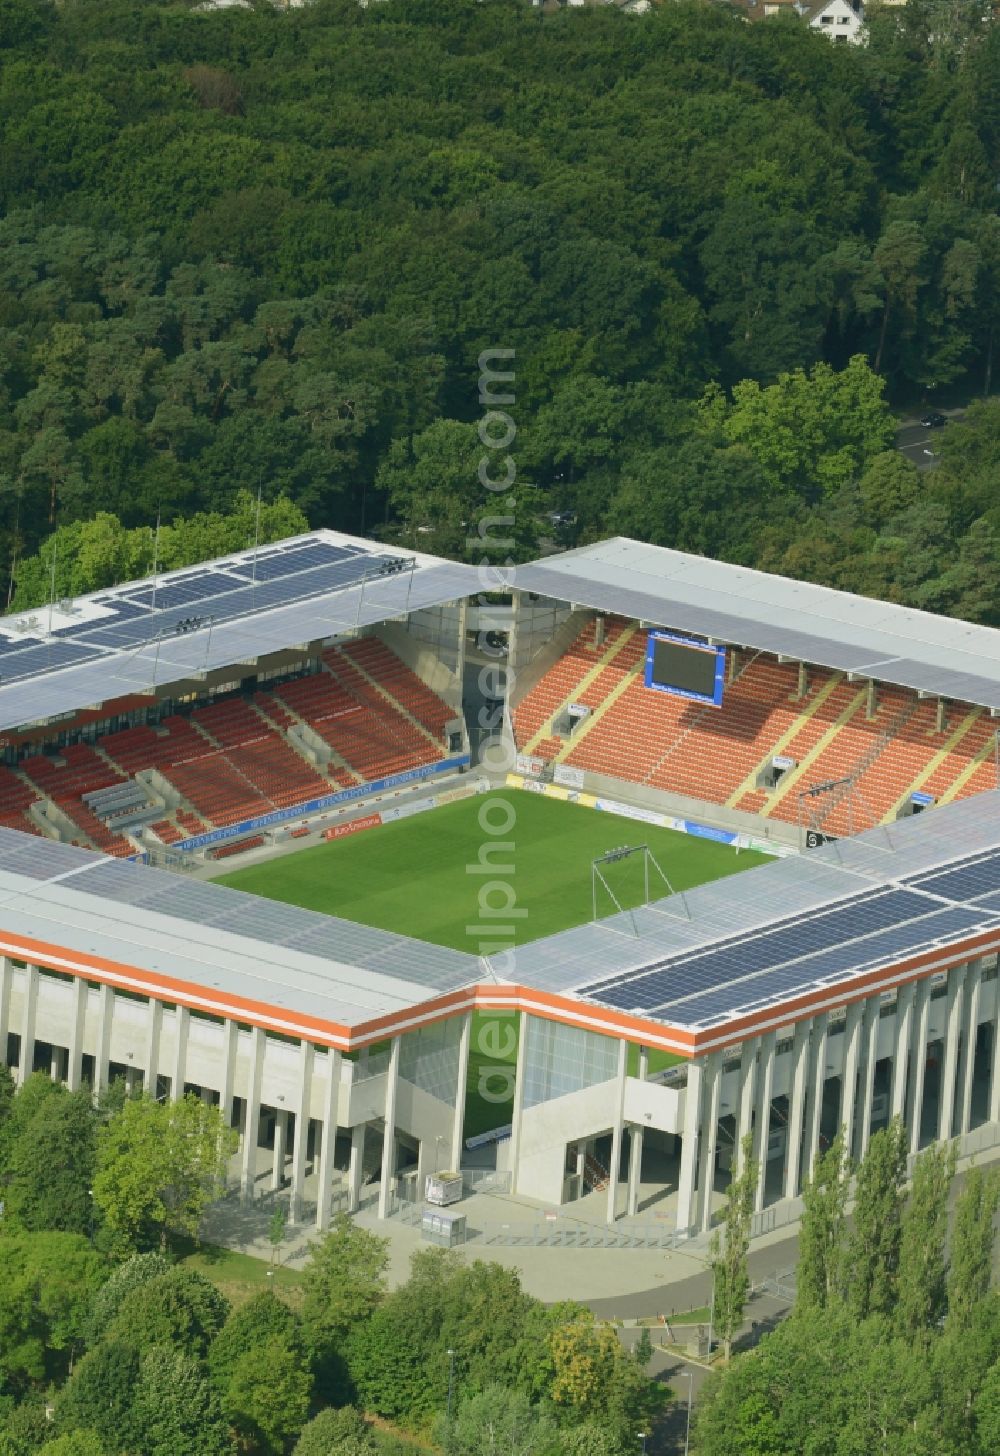 Offenbach am Main from the bird's eye view: Arena of the Stadium Sparda Bank Hessen Stadium in Offenbach in Hesse. The football stadium where the football club Kickers Offenbach is playing, is maintained by the stadium company Bieberer Berg (SBB) entertained